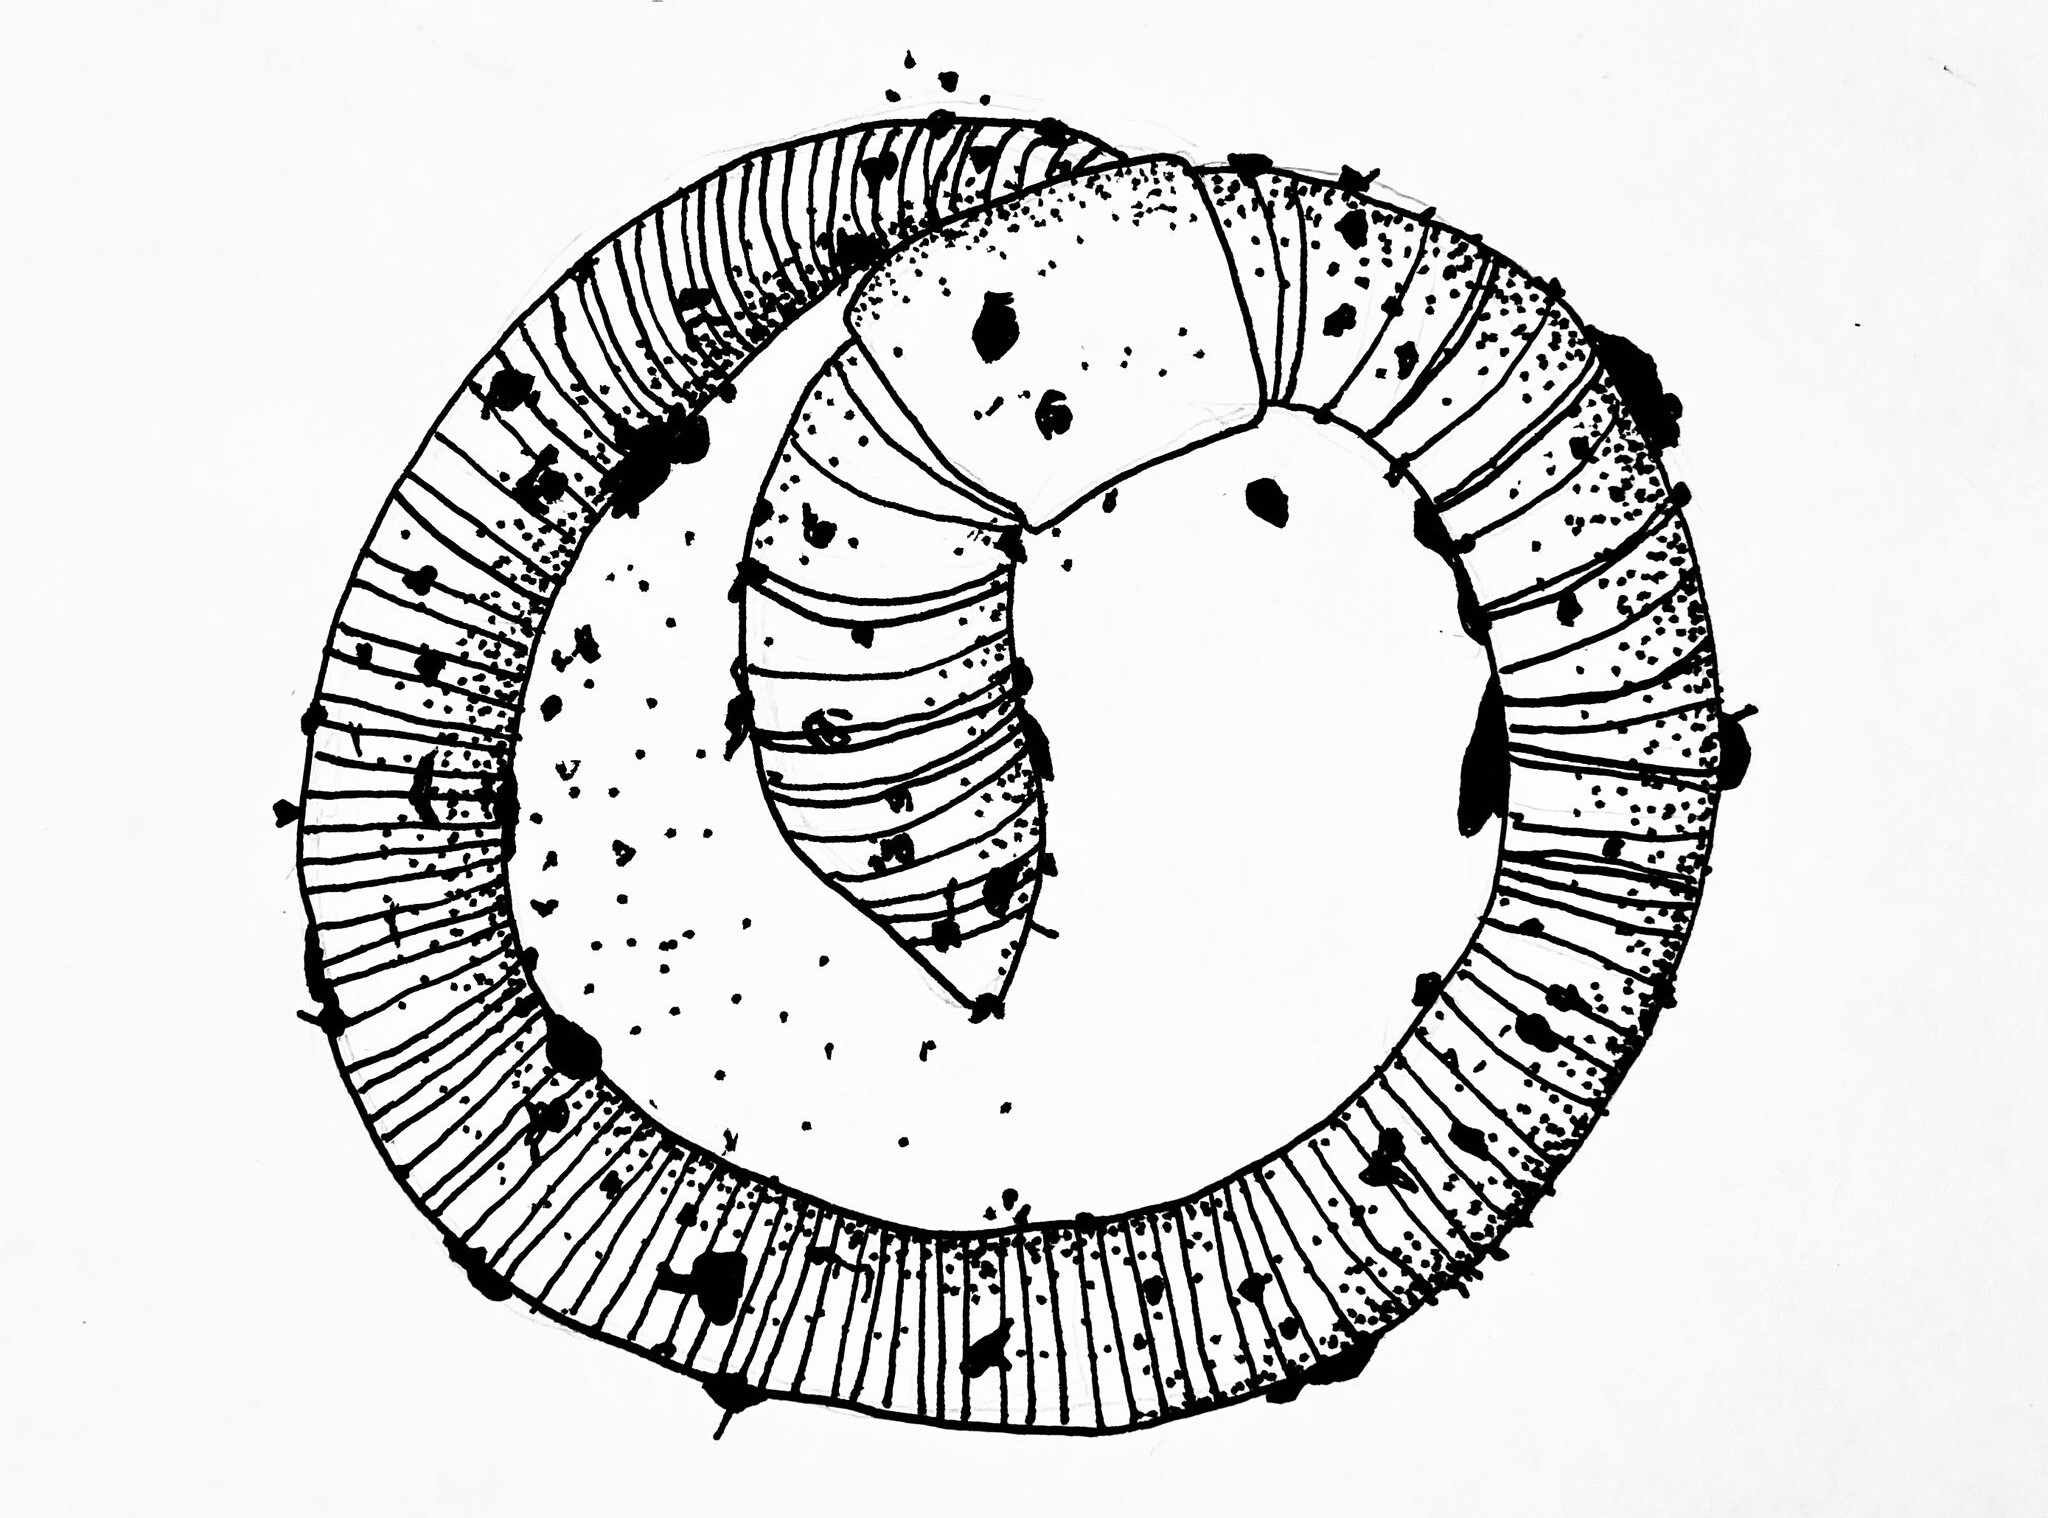 Black and white sketch of a coiled earthworm